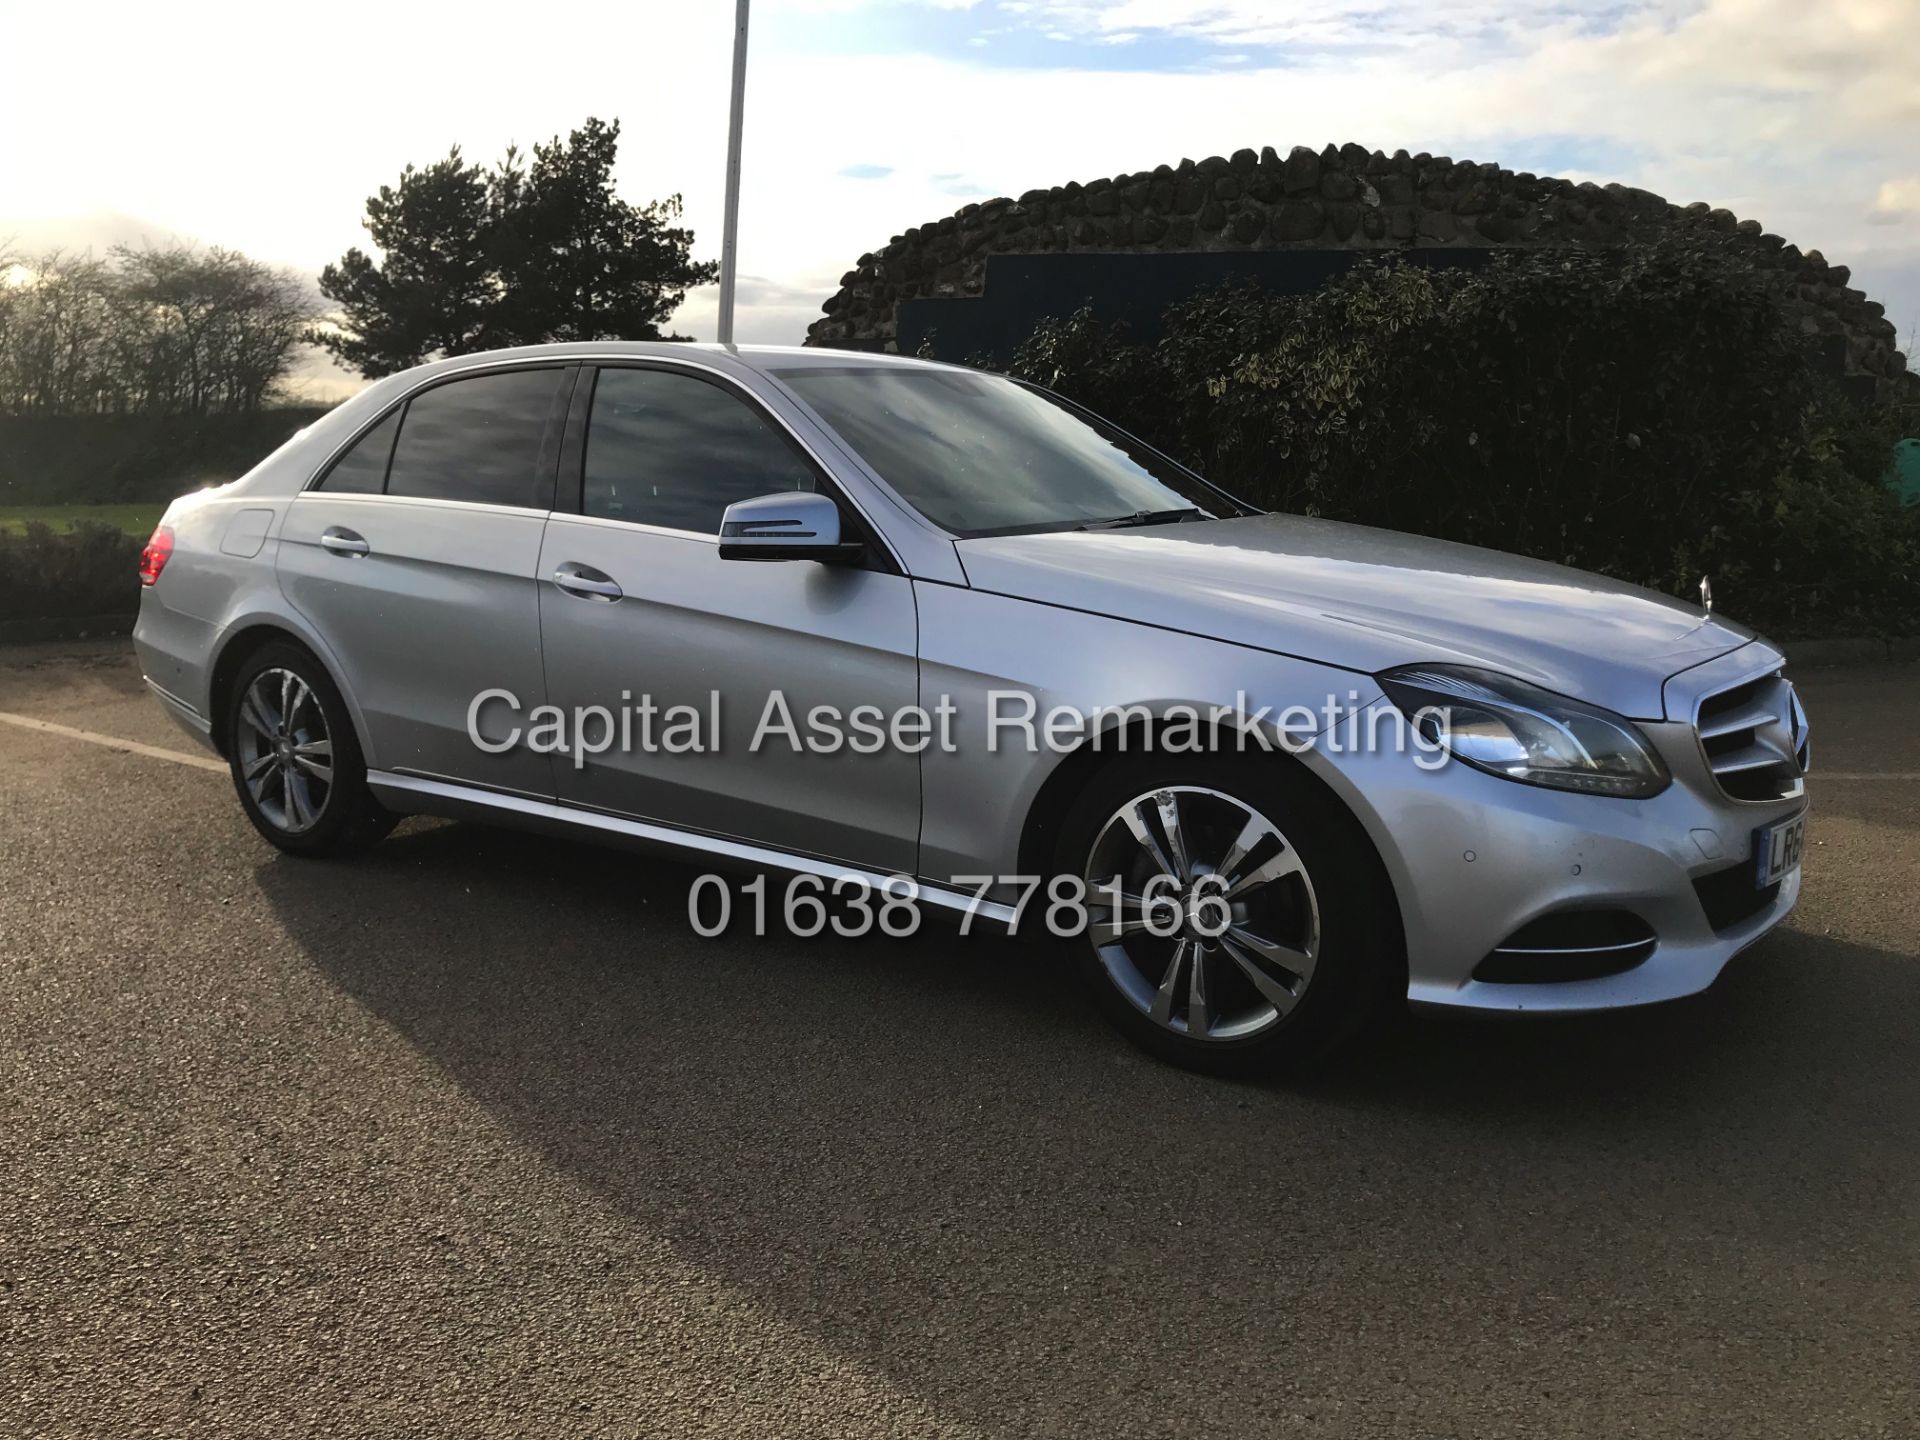 MERCEDES E220d "SPECIAL EQUIPMENT" 7G TRONIC AUTO (2015 MODEL) 1 OWNER - SAT NAV - LEATHER - Image 3 of 26